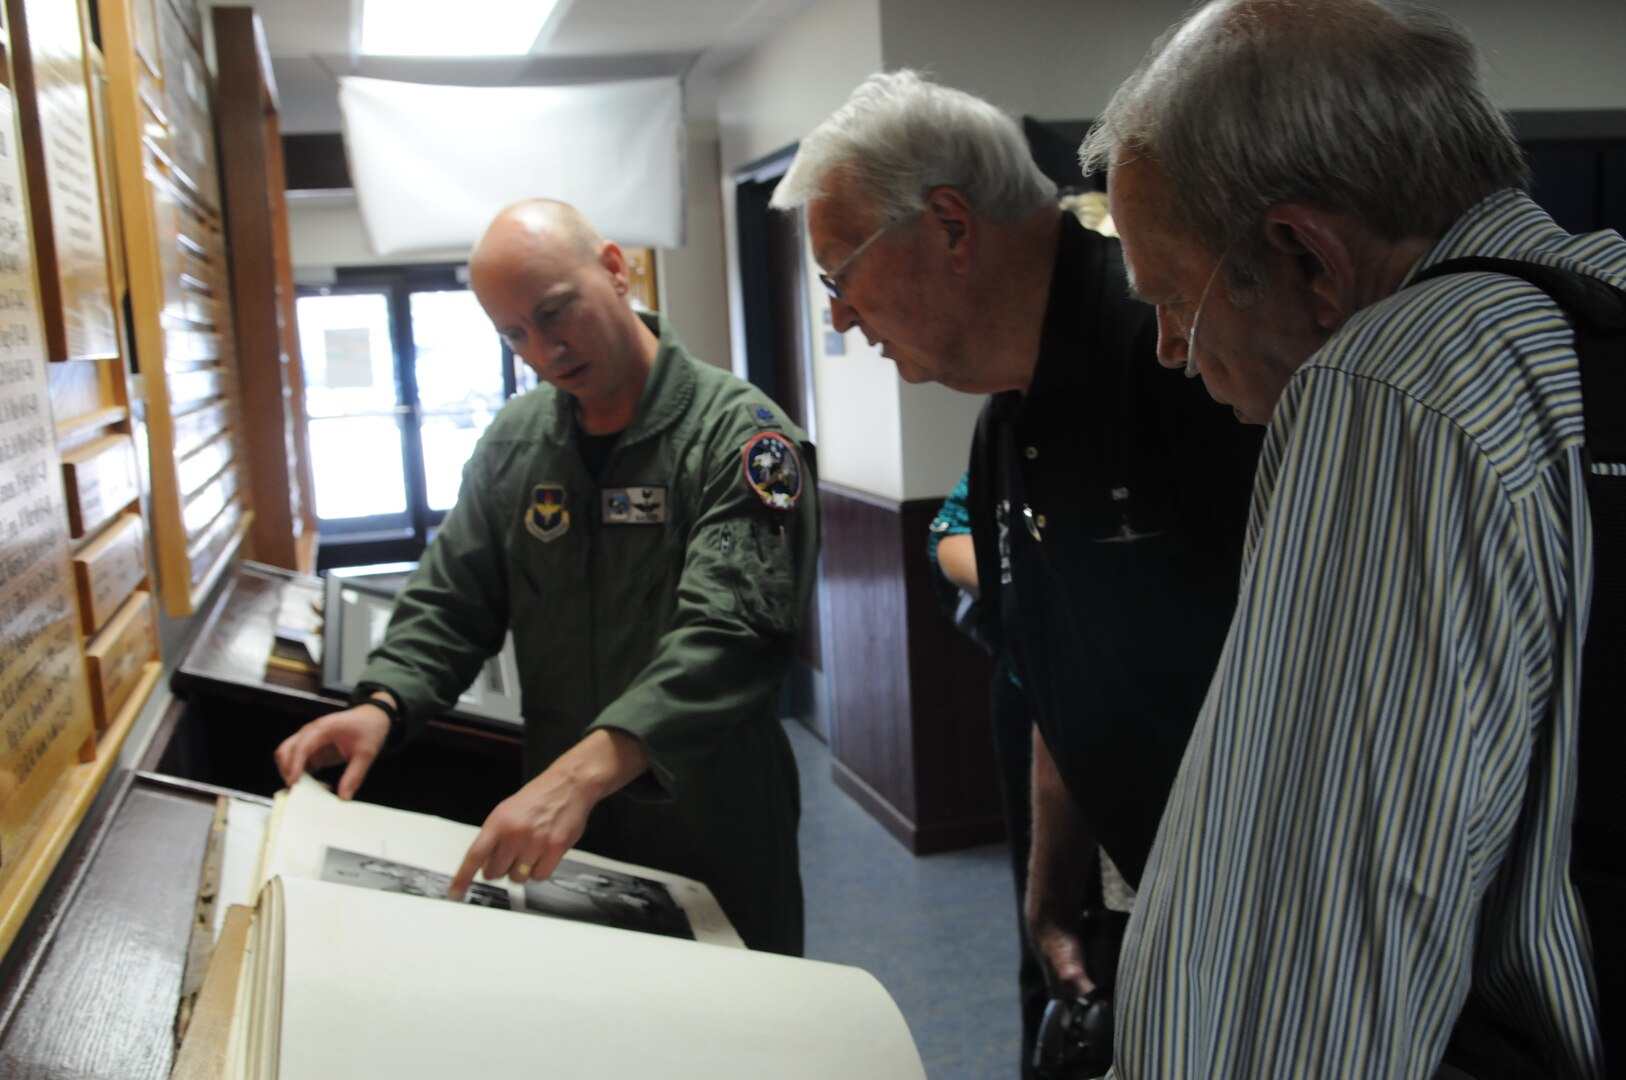 Retired U.S. Air Force Lt. Col. George McKinney (right) and retired Lt. Col. Dee Simonds (center) share their history and knowledge with Lt. Col. Mark Schmidt, 435th Fighter Training Squadron commander, Sept. 5, 2014, during an Introduction to Fighter Fundamentals Course graduations at Joint Base San Antonio-Randolph.  Simmonds and McKinney were members of the 435th Tactical Fighter Squadron, now the 435th FTS at JBSA-Randolph, when they became the first F-4 Phantom crew to shoot down two MiG-21 aircraft during a single mission Nov. 6, 1967.  (U.S. Air Force photo by 2nd Lt. Chris Flowers)